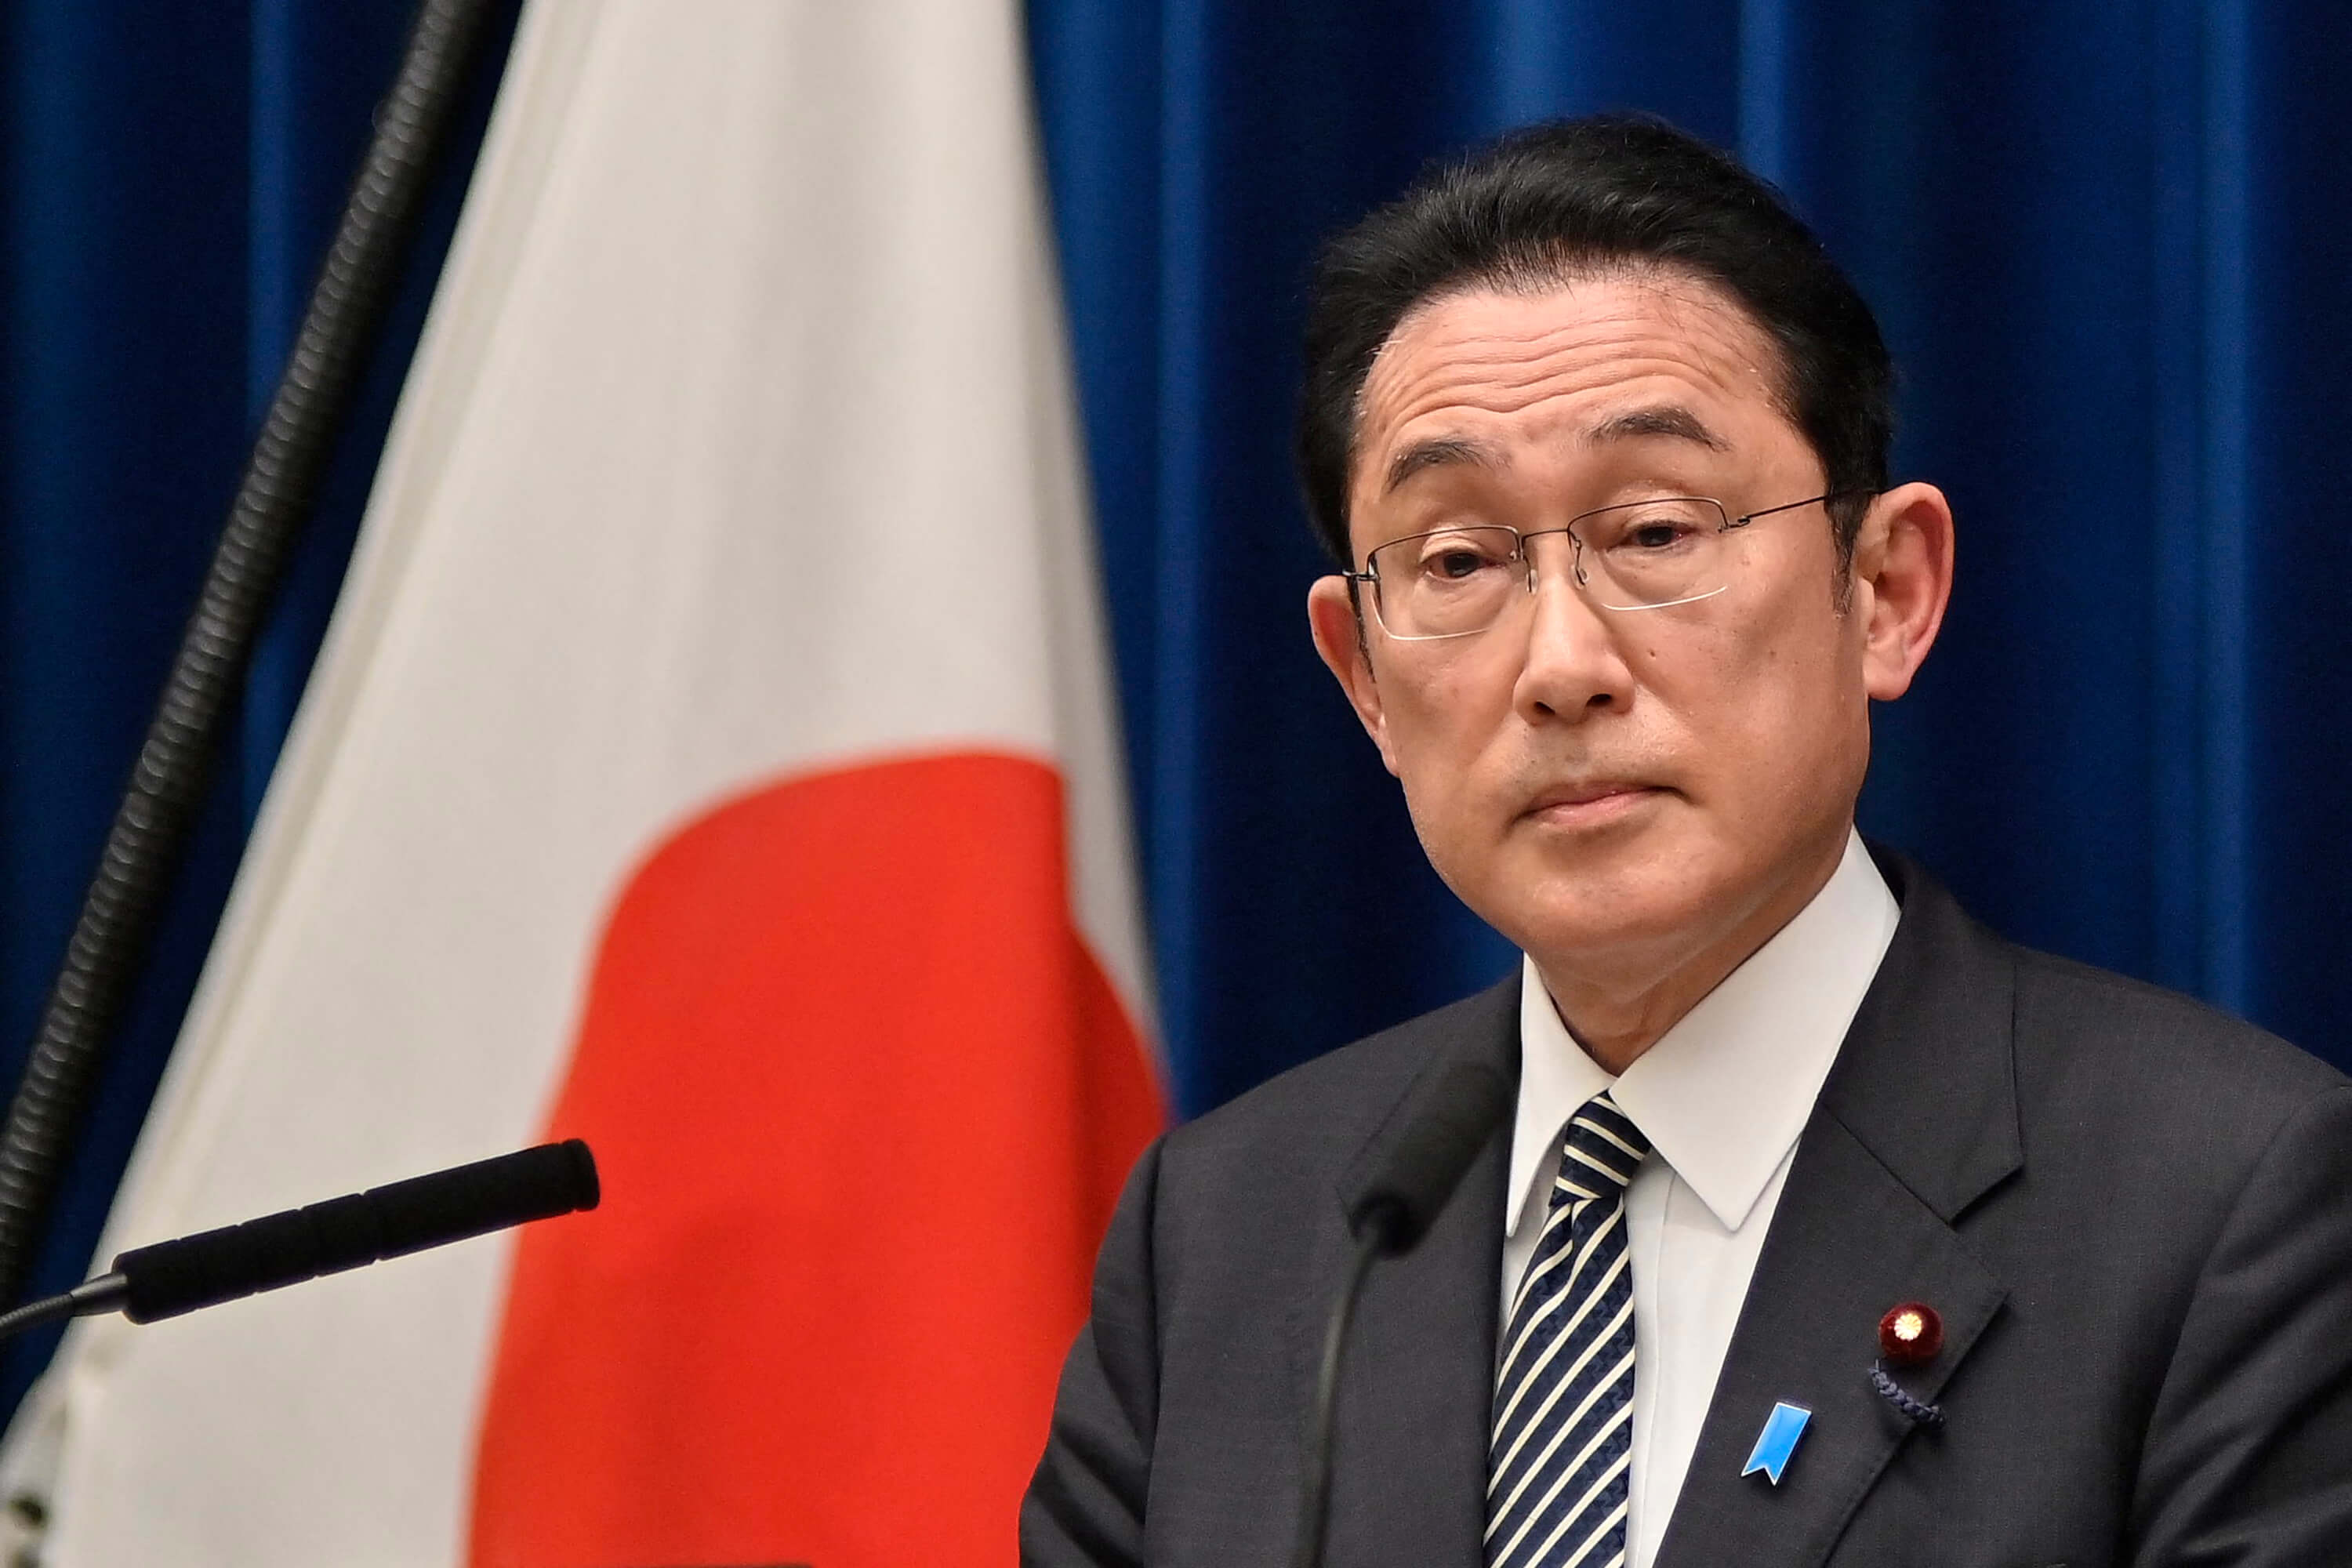 Exchange students in Japan could receive ¥100,000 for financial trouble: gov't